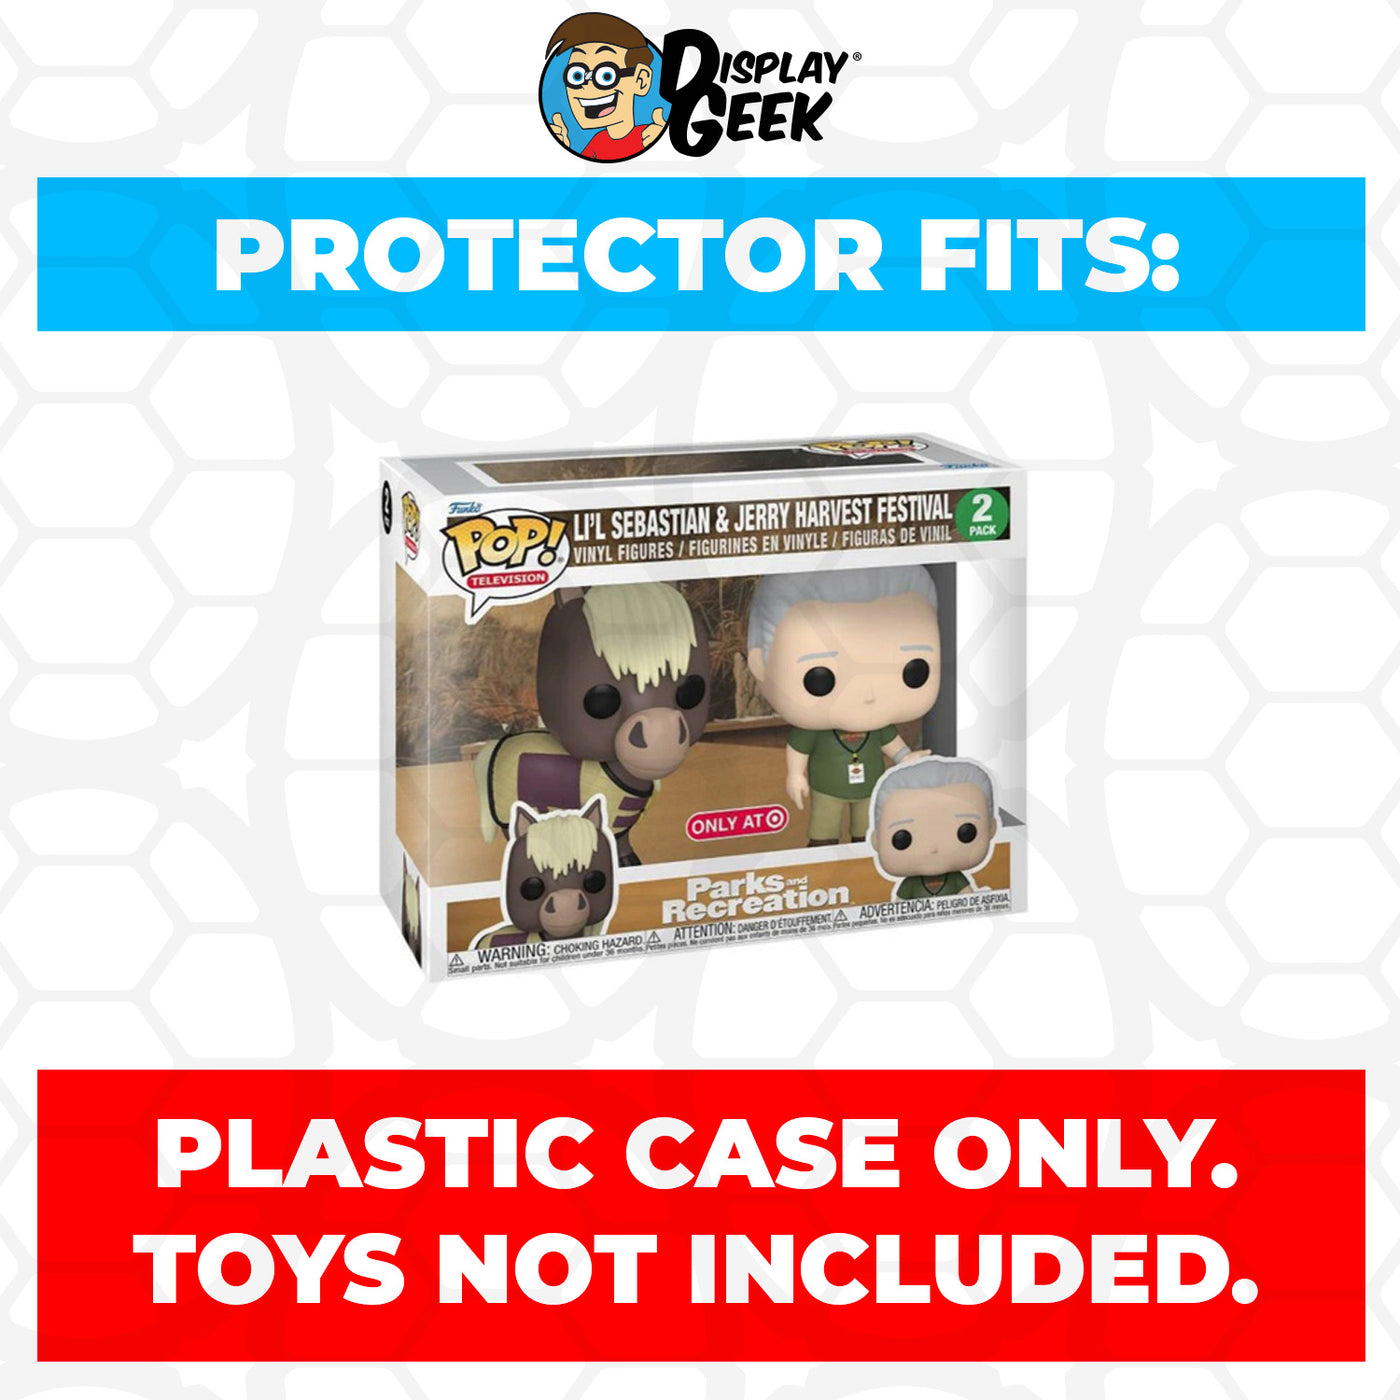 Pop Protector for 2 Pack Li'l Sebastian and Jerry Harvest Festival Funko Pop on The Protector Guide App by Display Geek